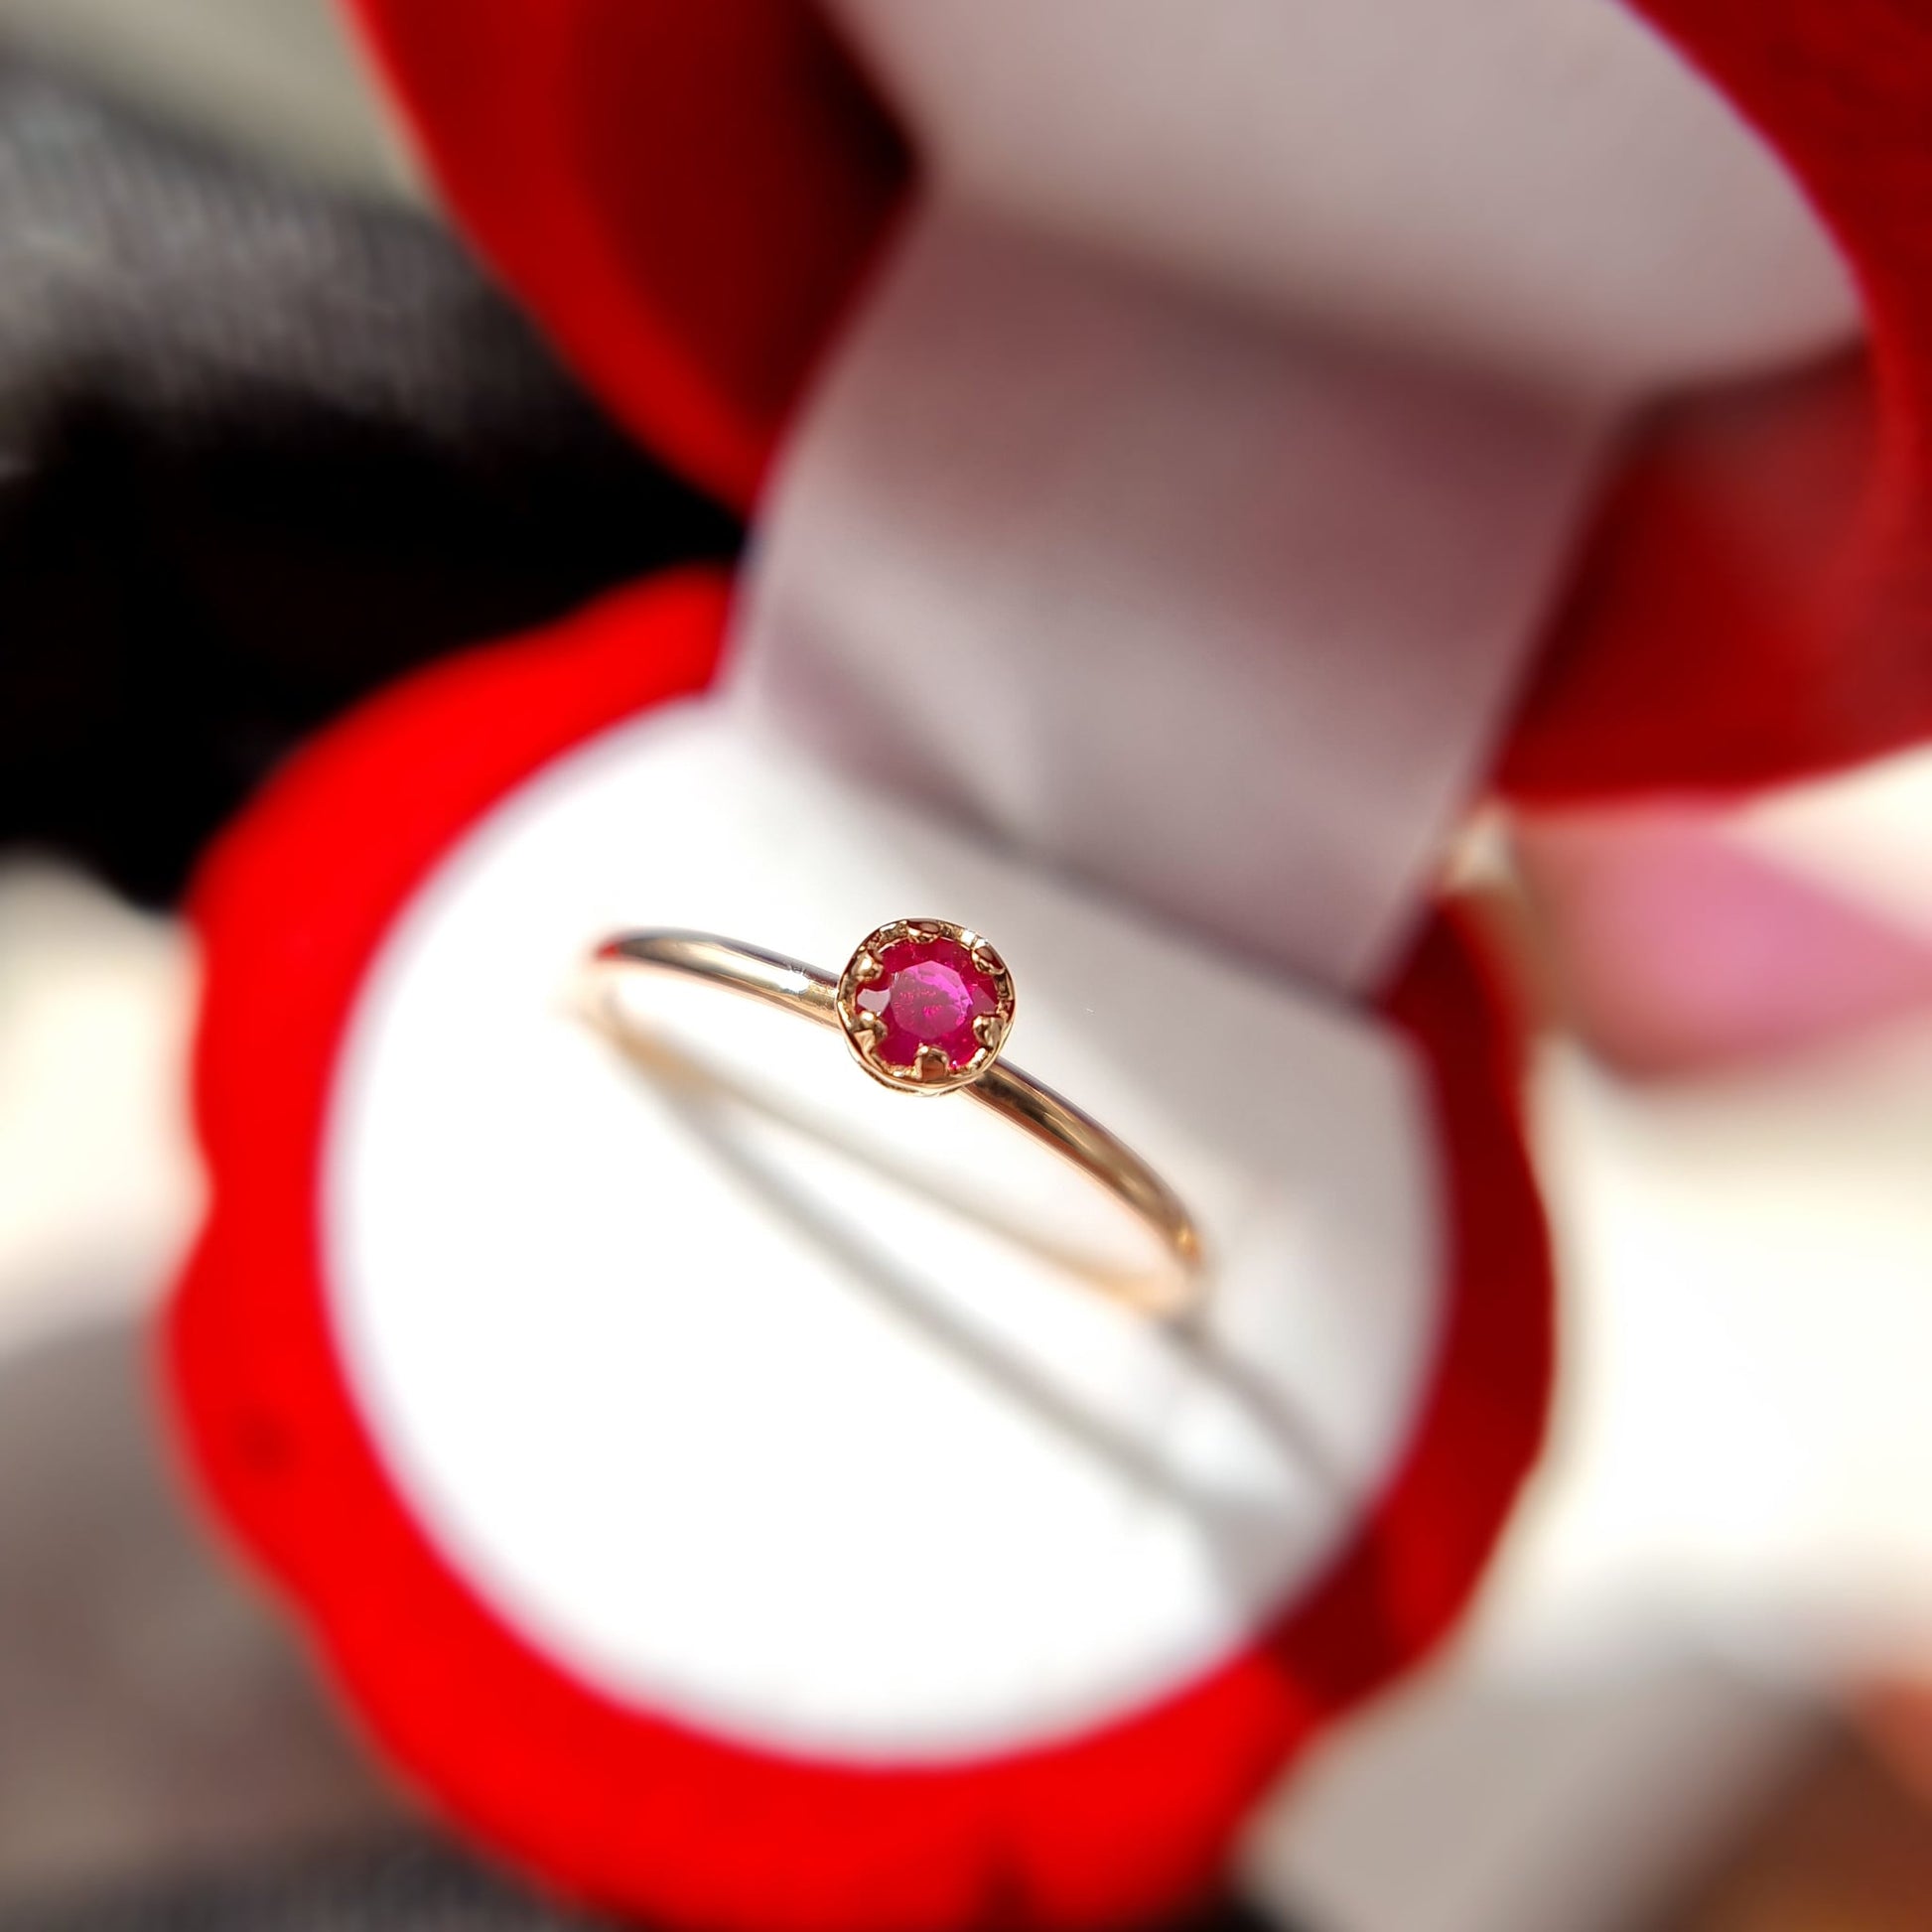 Ring with Ruby Stone